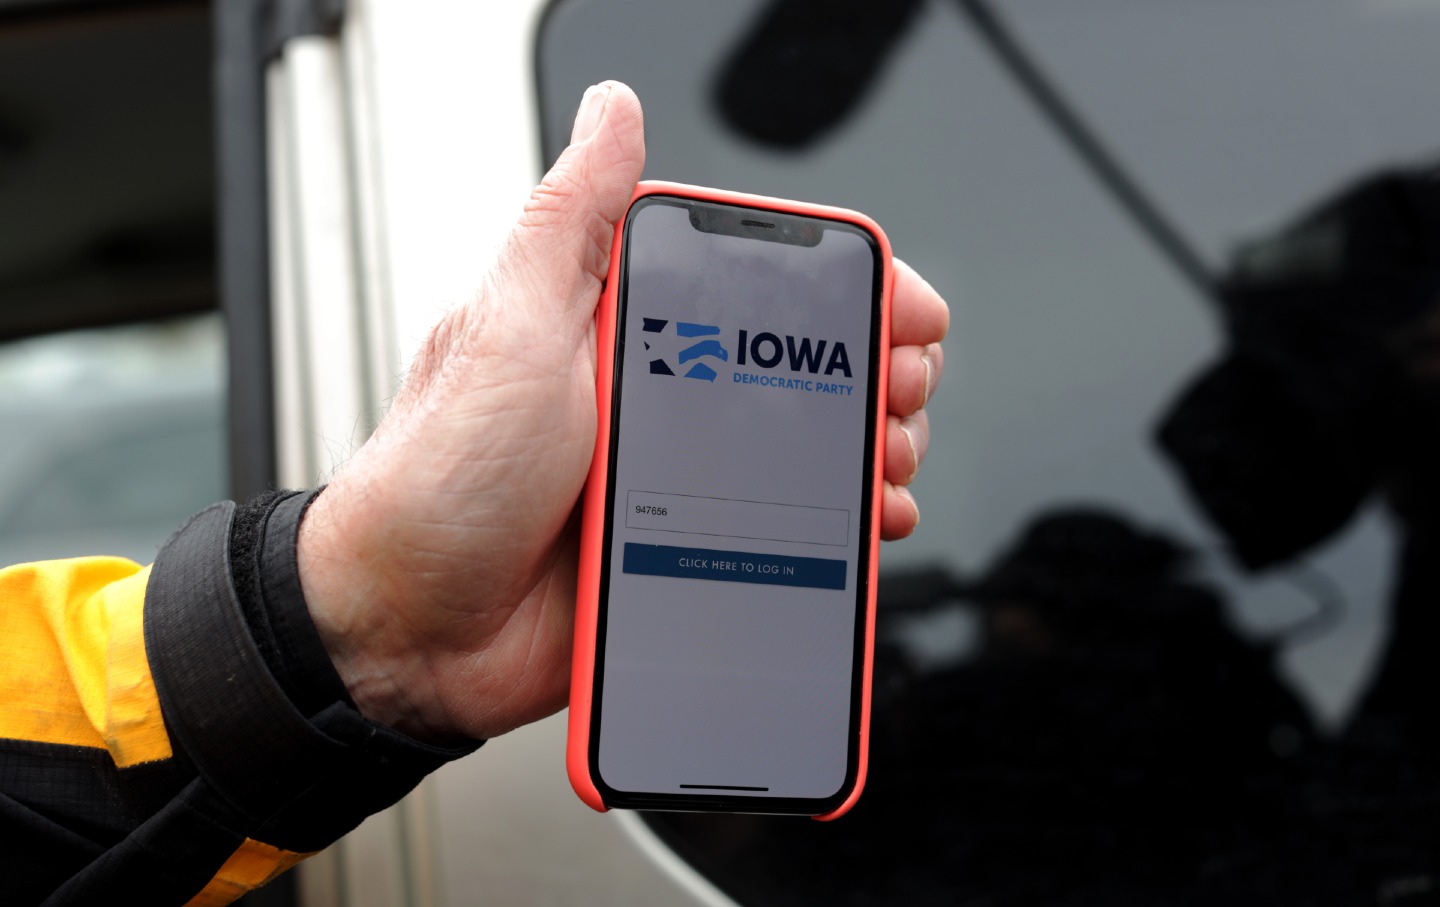 A precinct chair holds up his phone showing the Iowa caucus app